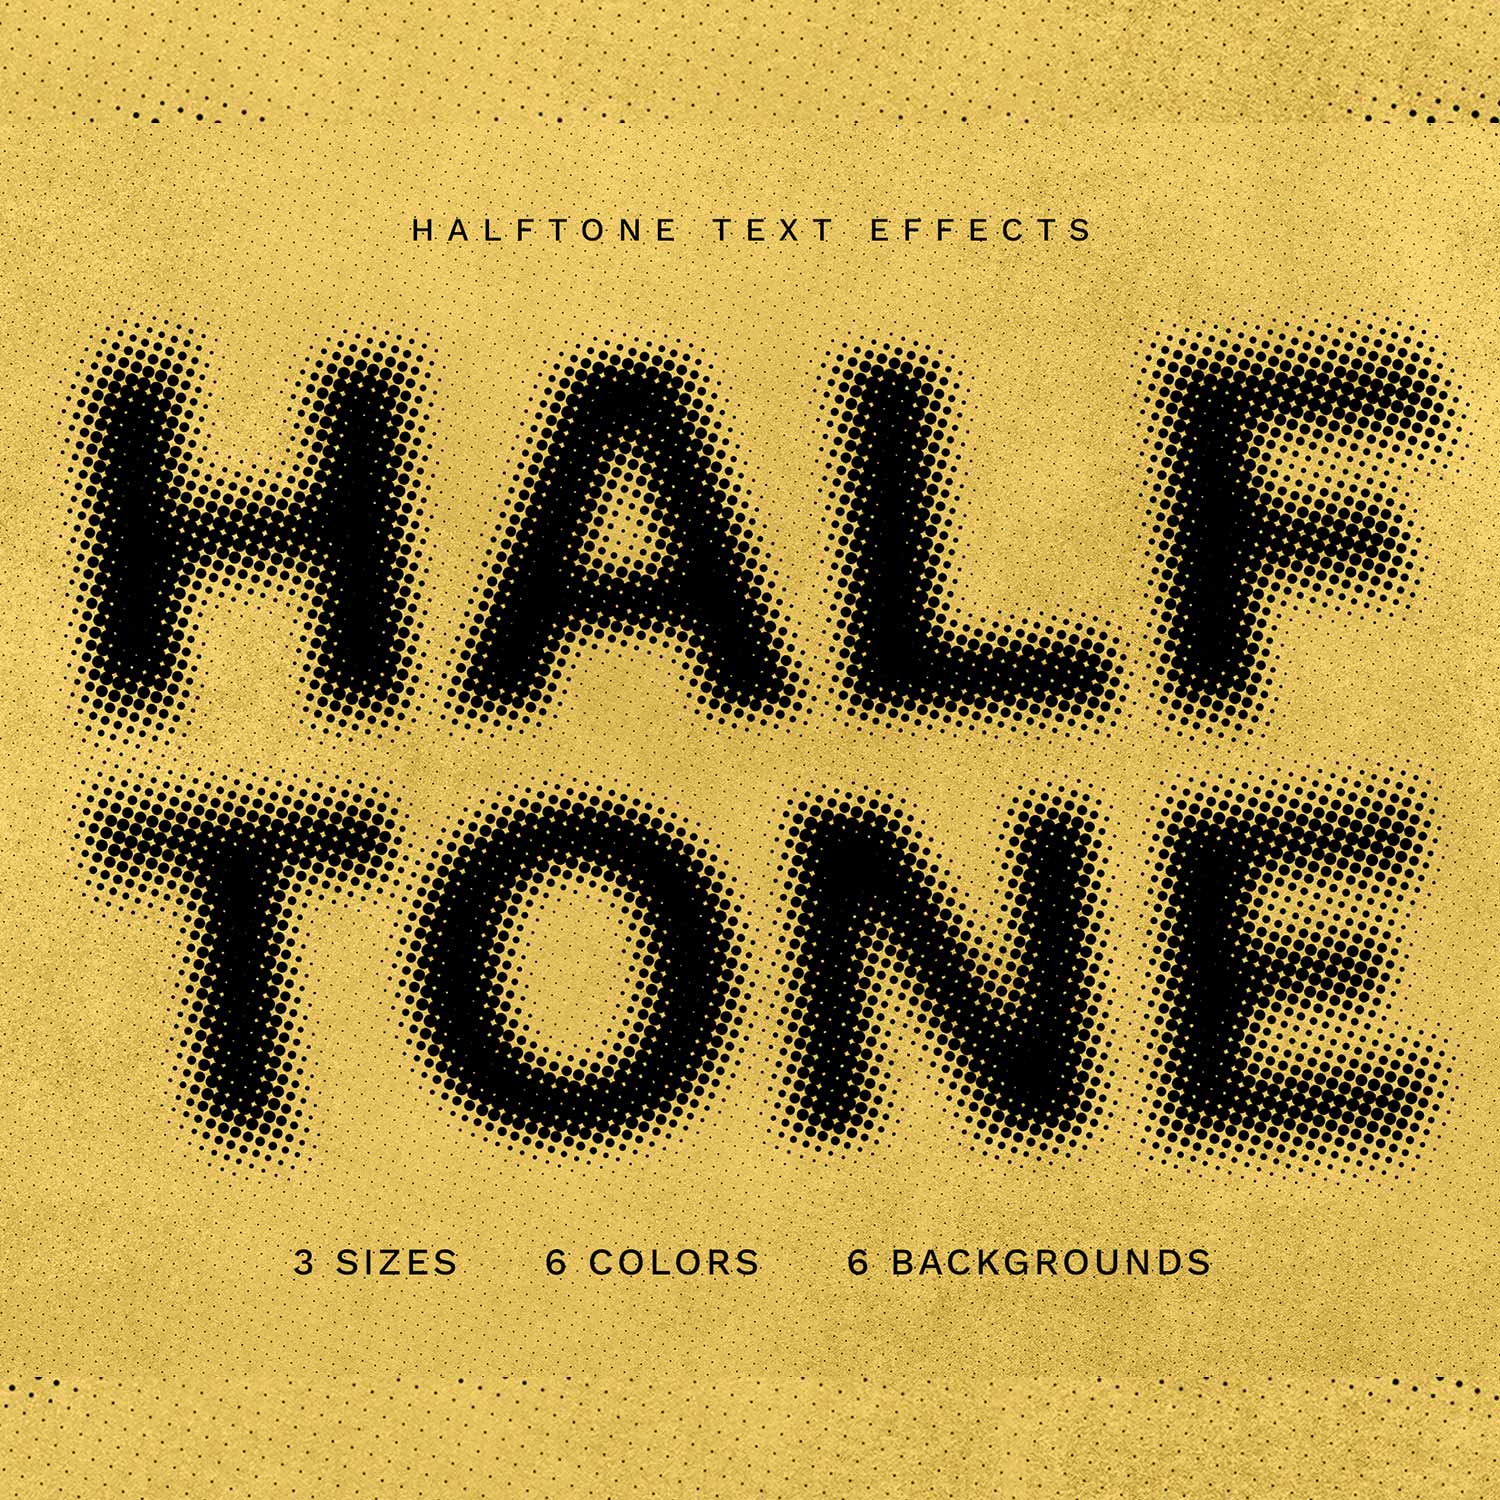 Halftone Text Effect cover image.